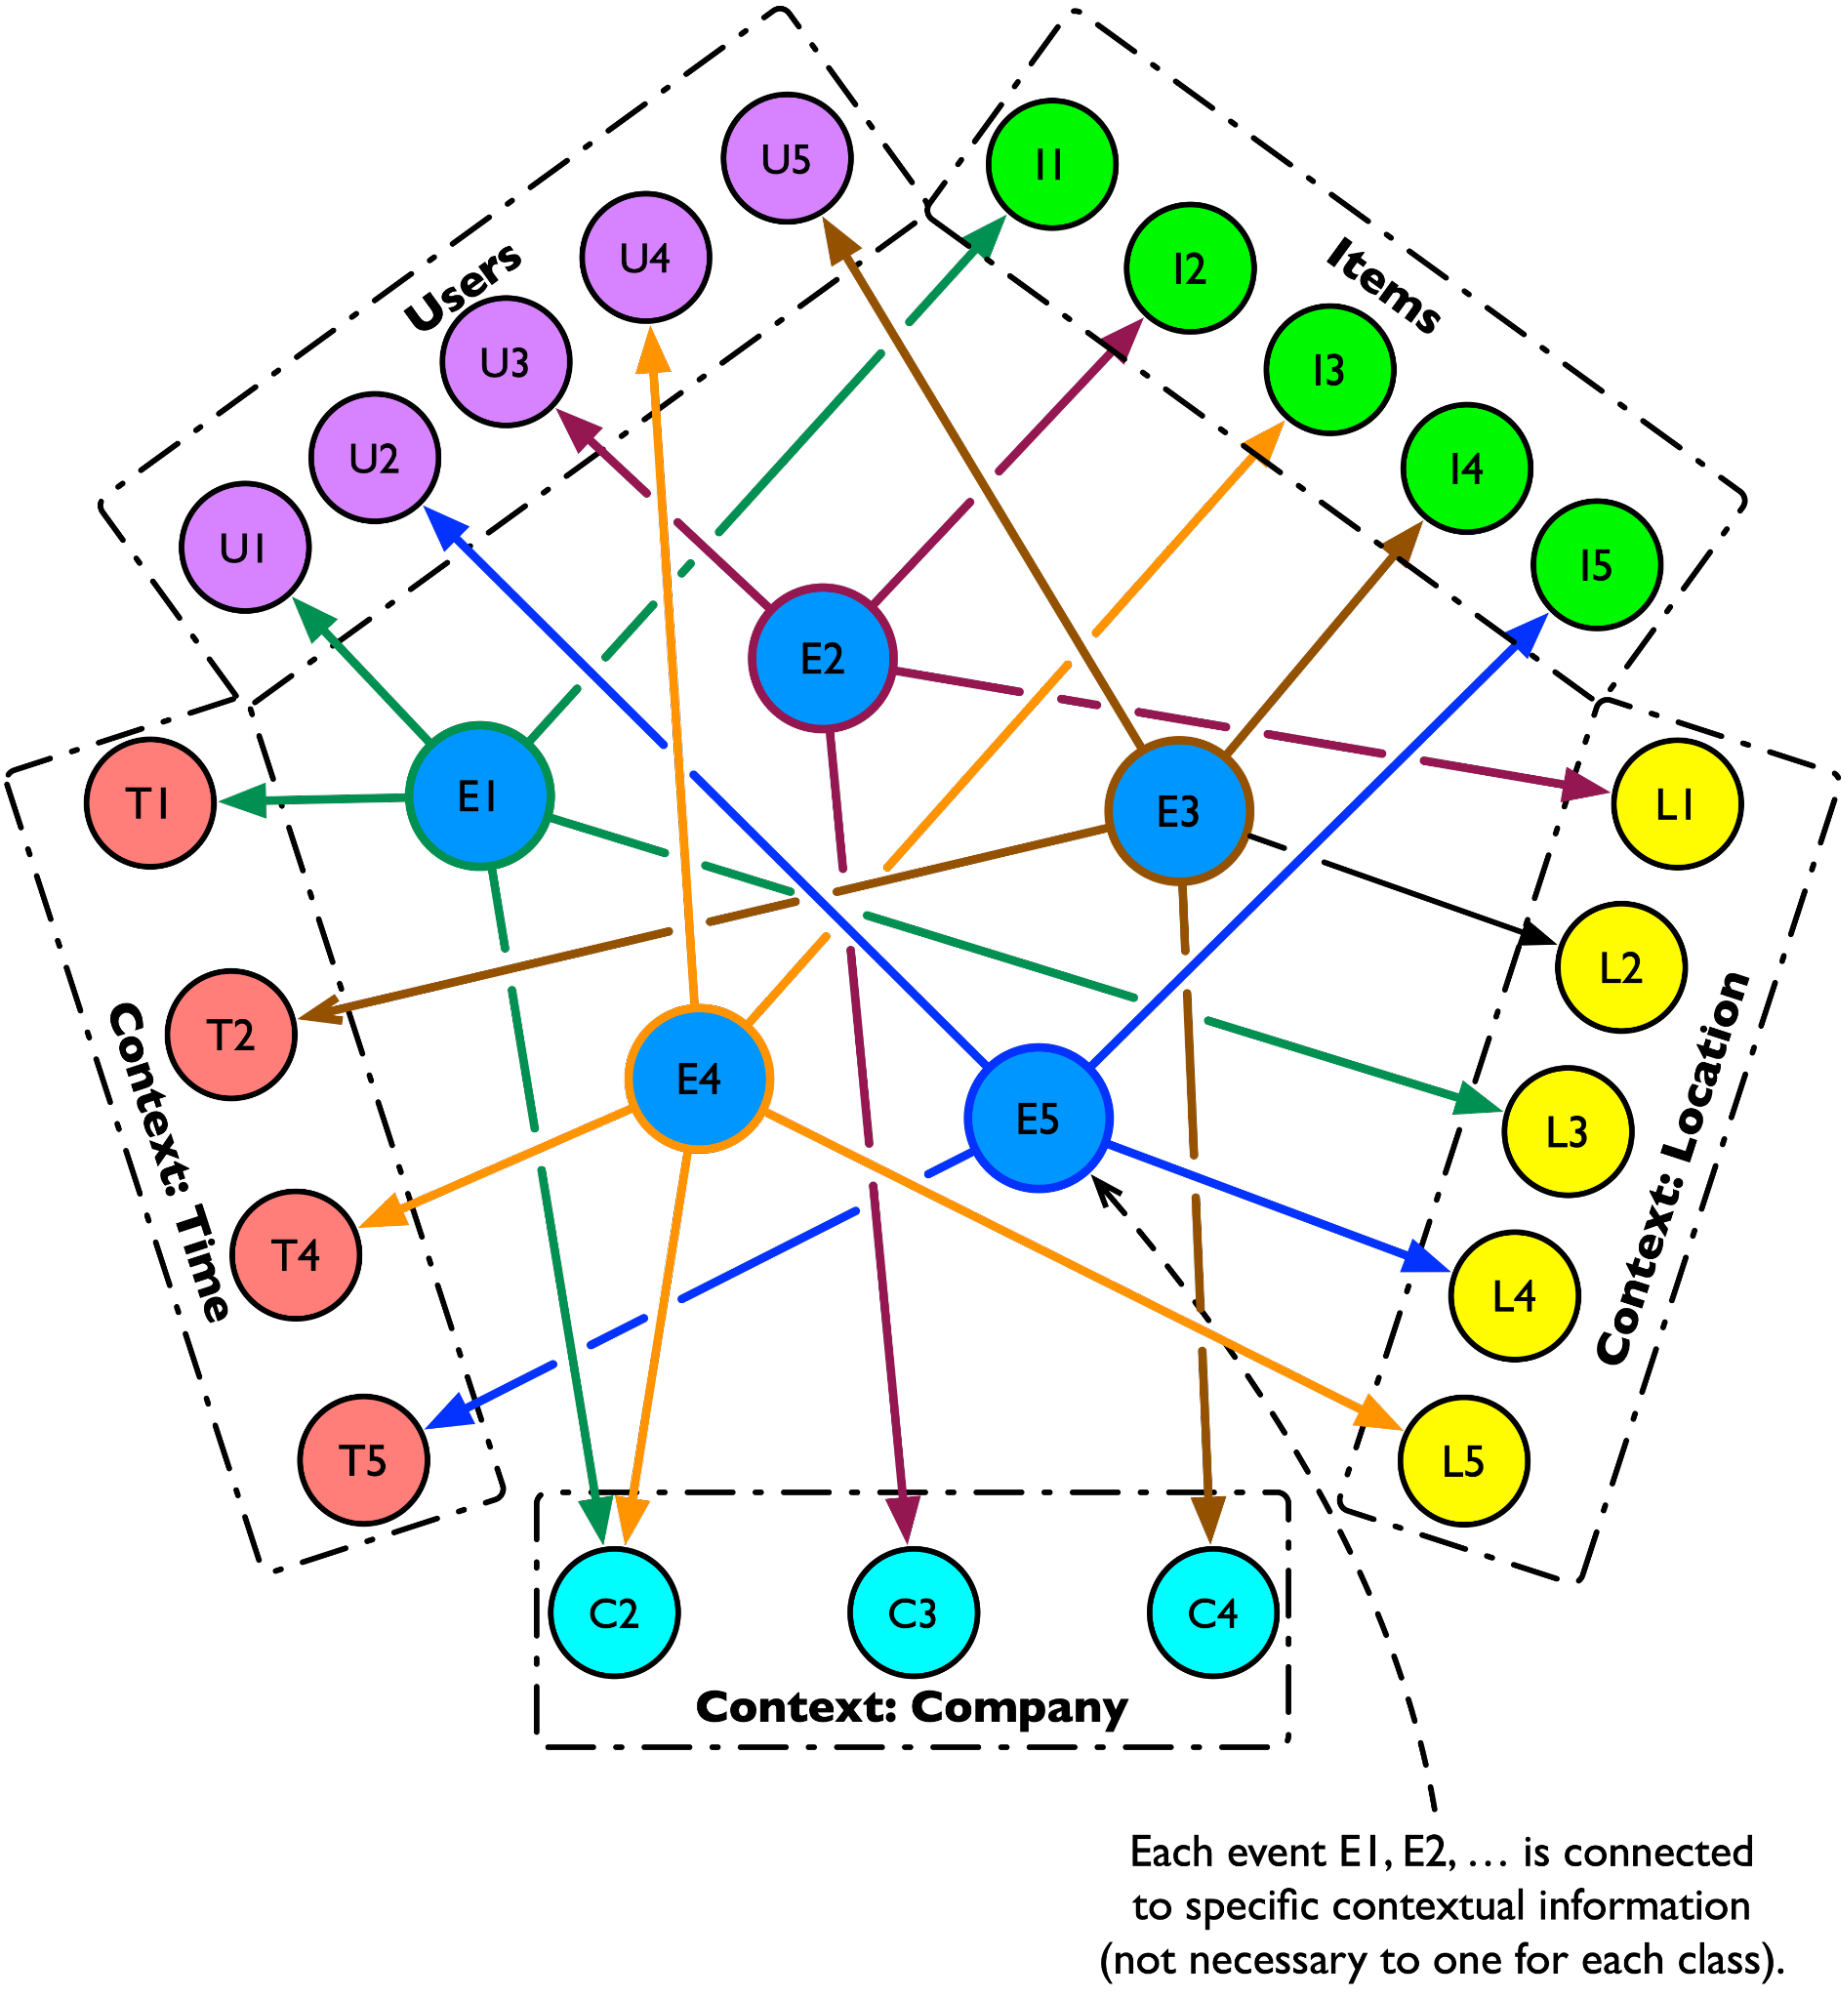 N-partide graph representing contextual information about events